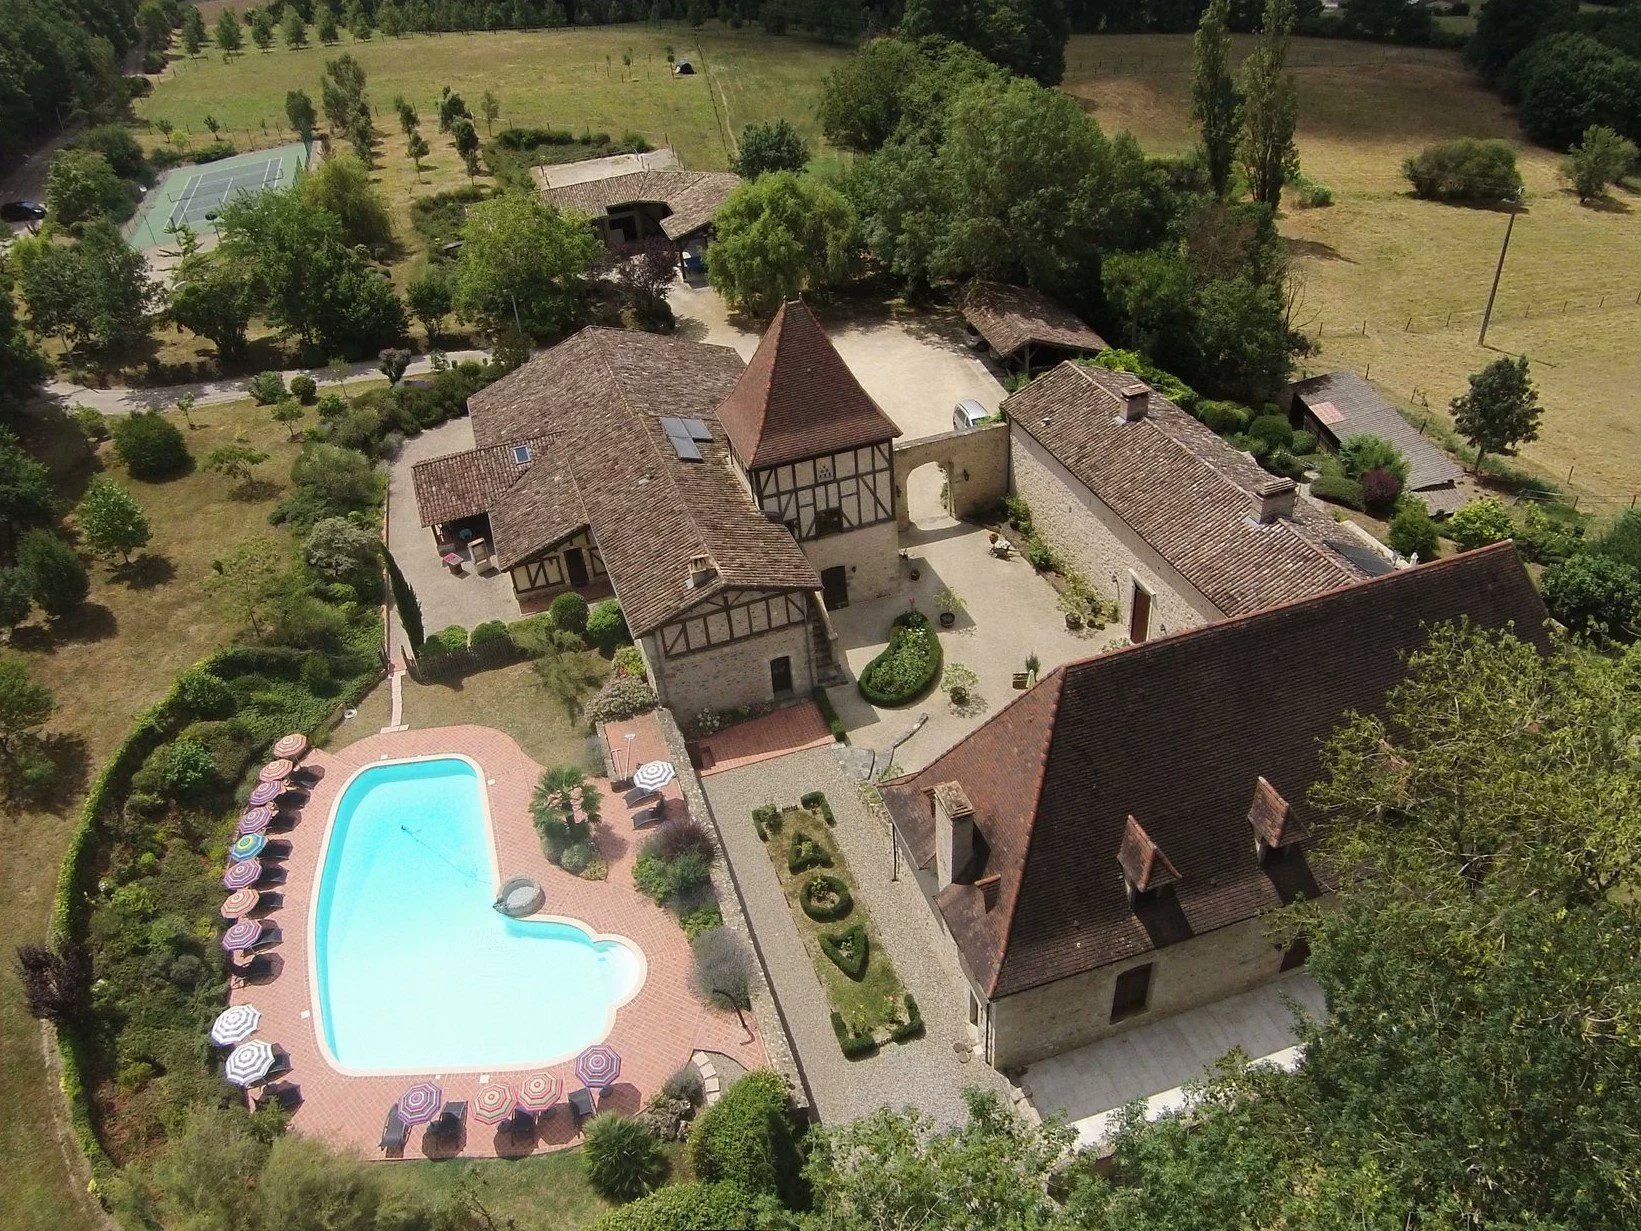 Superb château entirely restored using traditional methods and with high quality materials